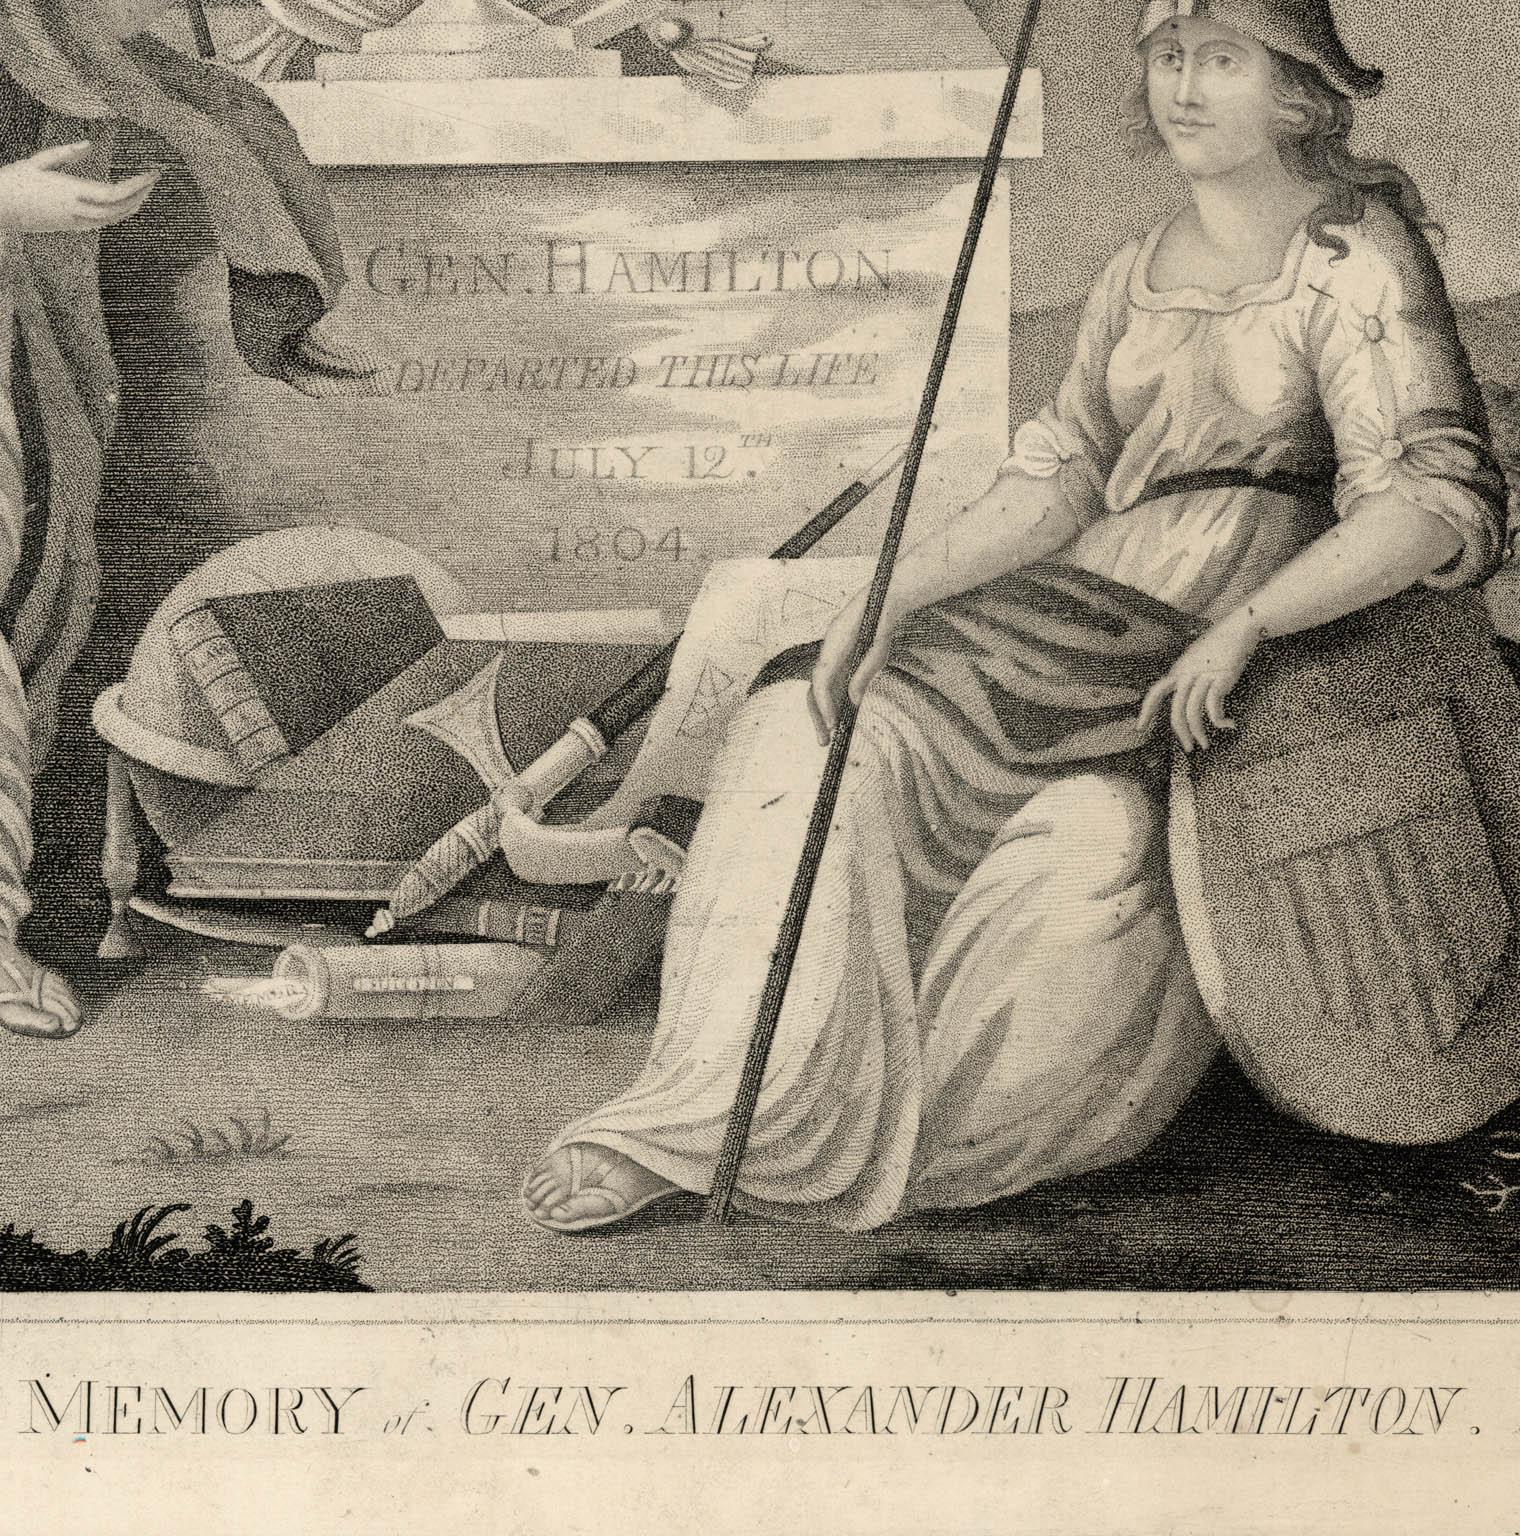 Stipple and line engraving, circa 1805. This memorial print was likely created soon after Hamilton’s death.  It is very rare with two impressions in the Library of Congress and one in the Museum of the City of New York.  “ J. Scoles, Sculpt. ‘Gen.